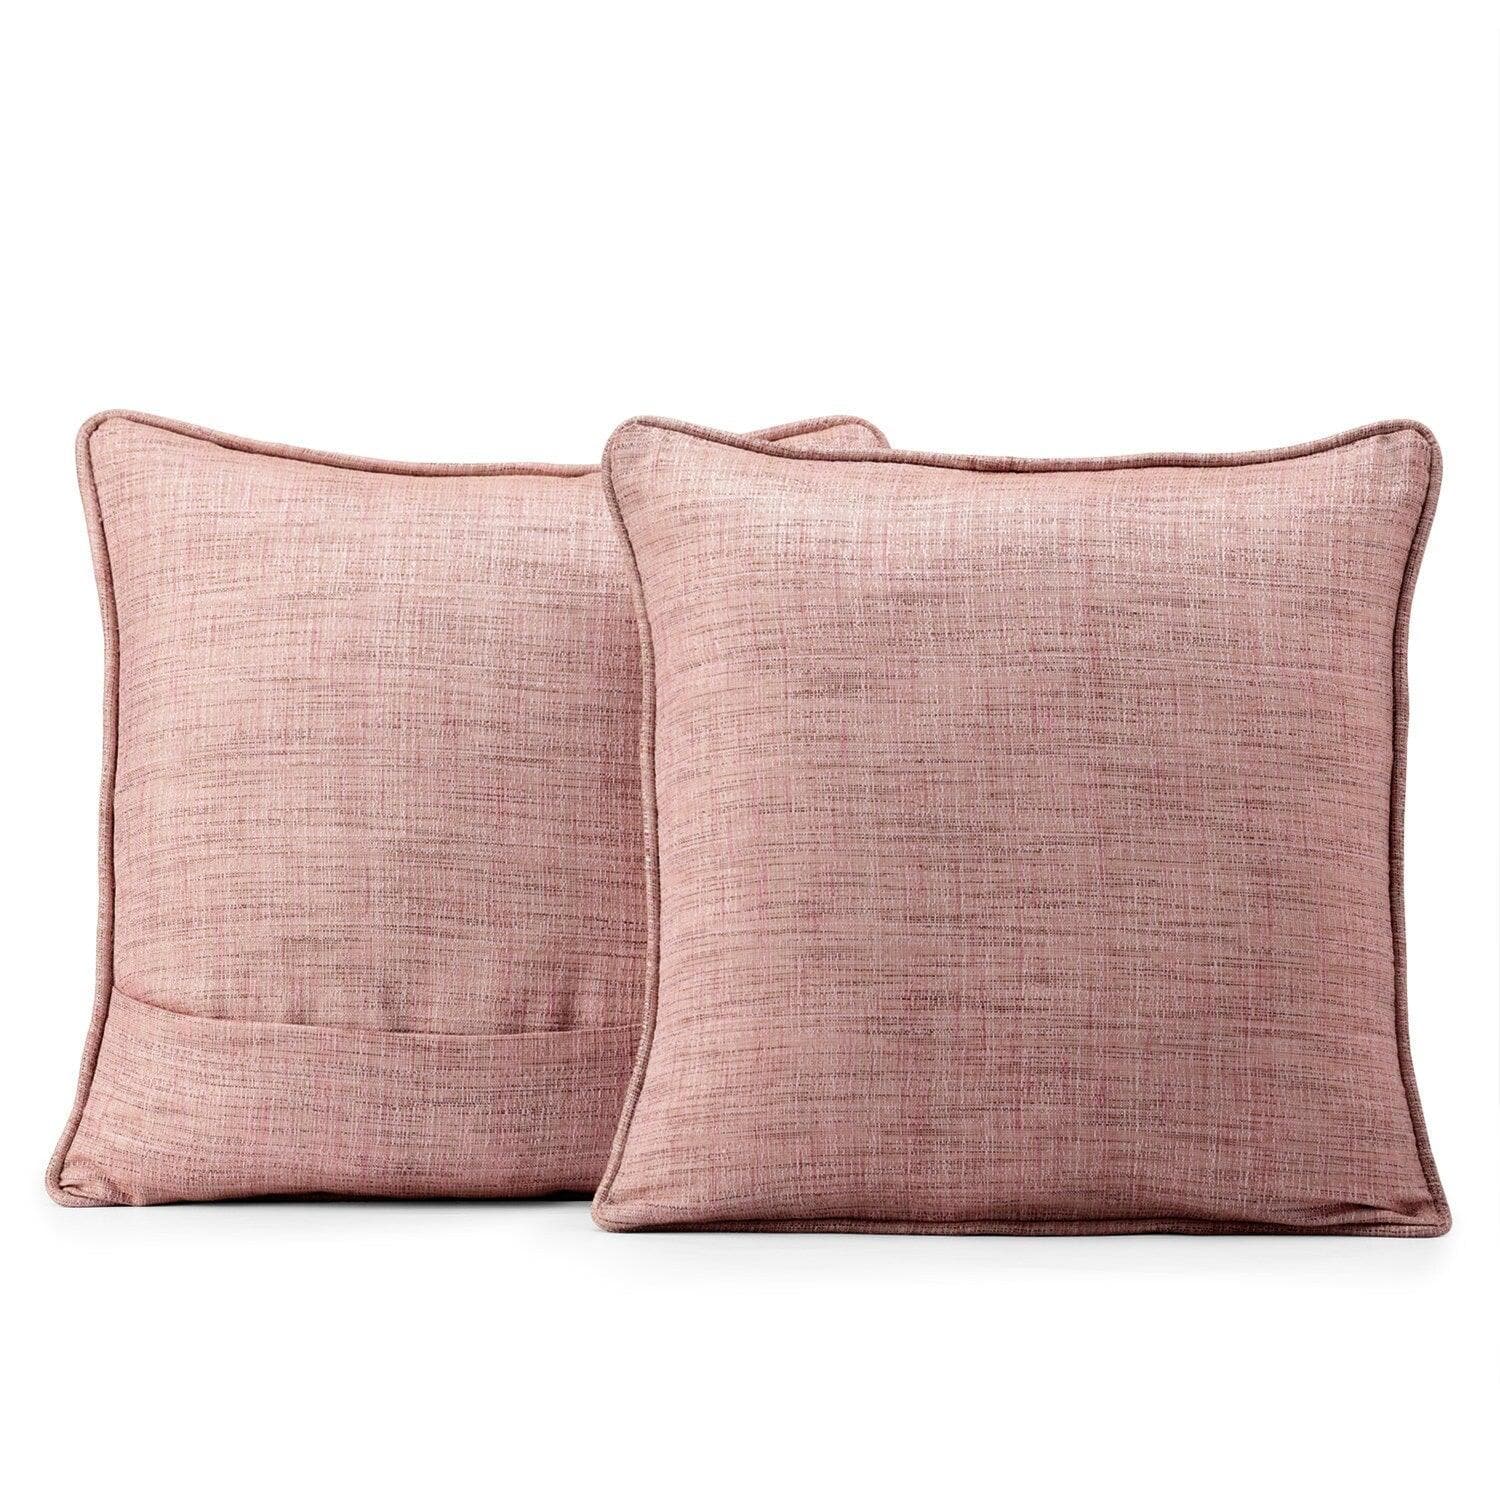 Rosey Pink Faux Raw Silk Cushion Covers - Pair